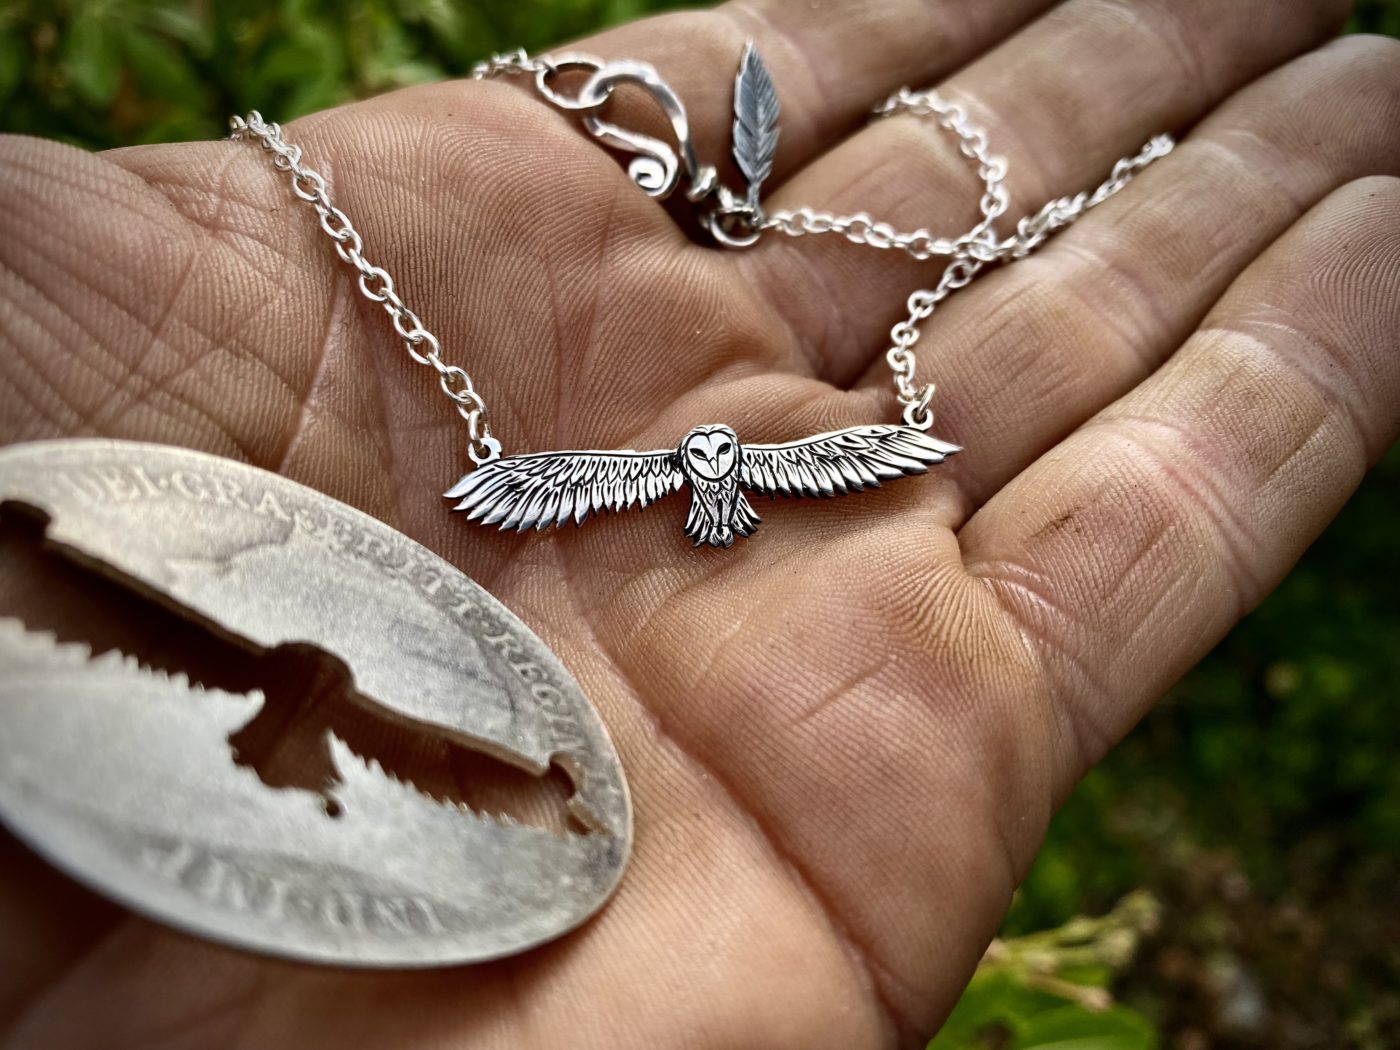 Gillihowlet flying barn owl necklace handmade from sterling silver upcycled from pre 1920 silver coins of the British realm